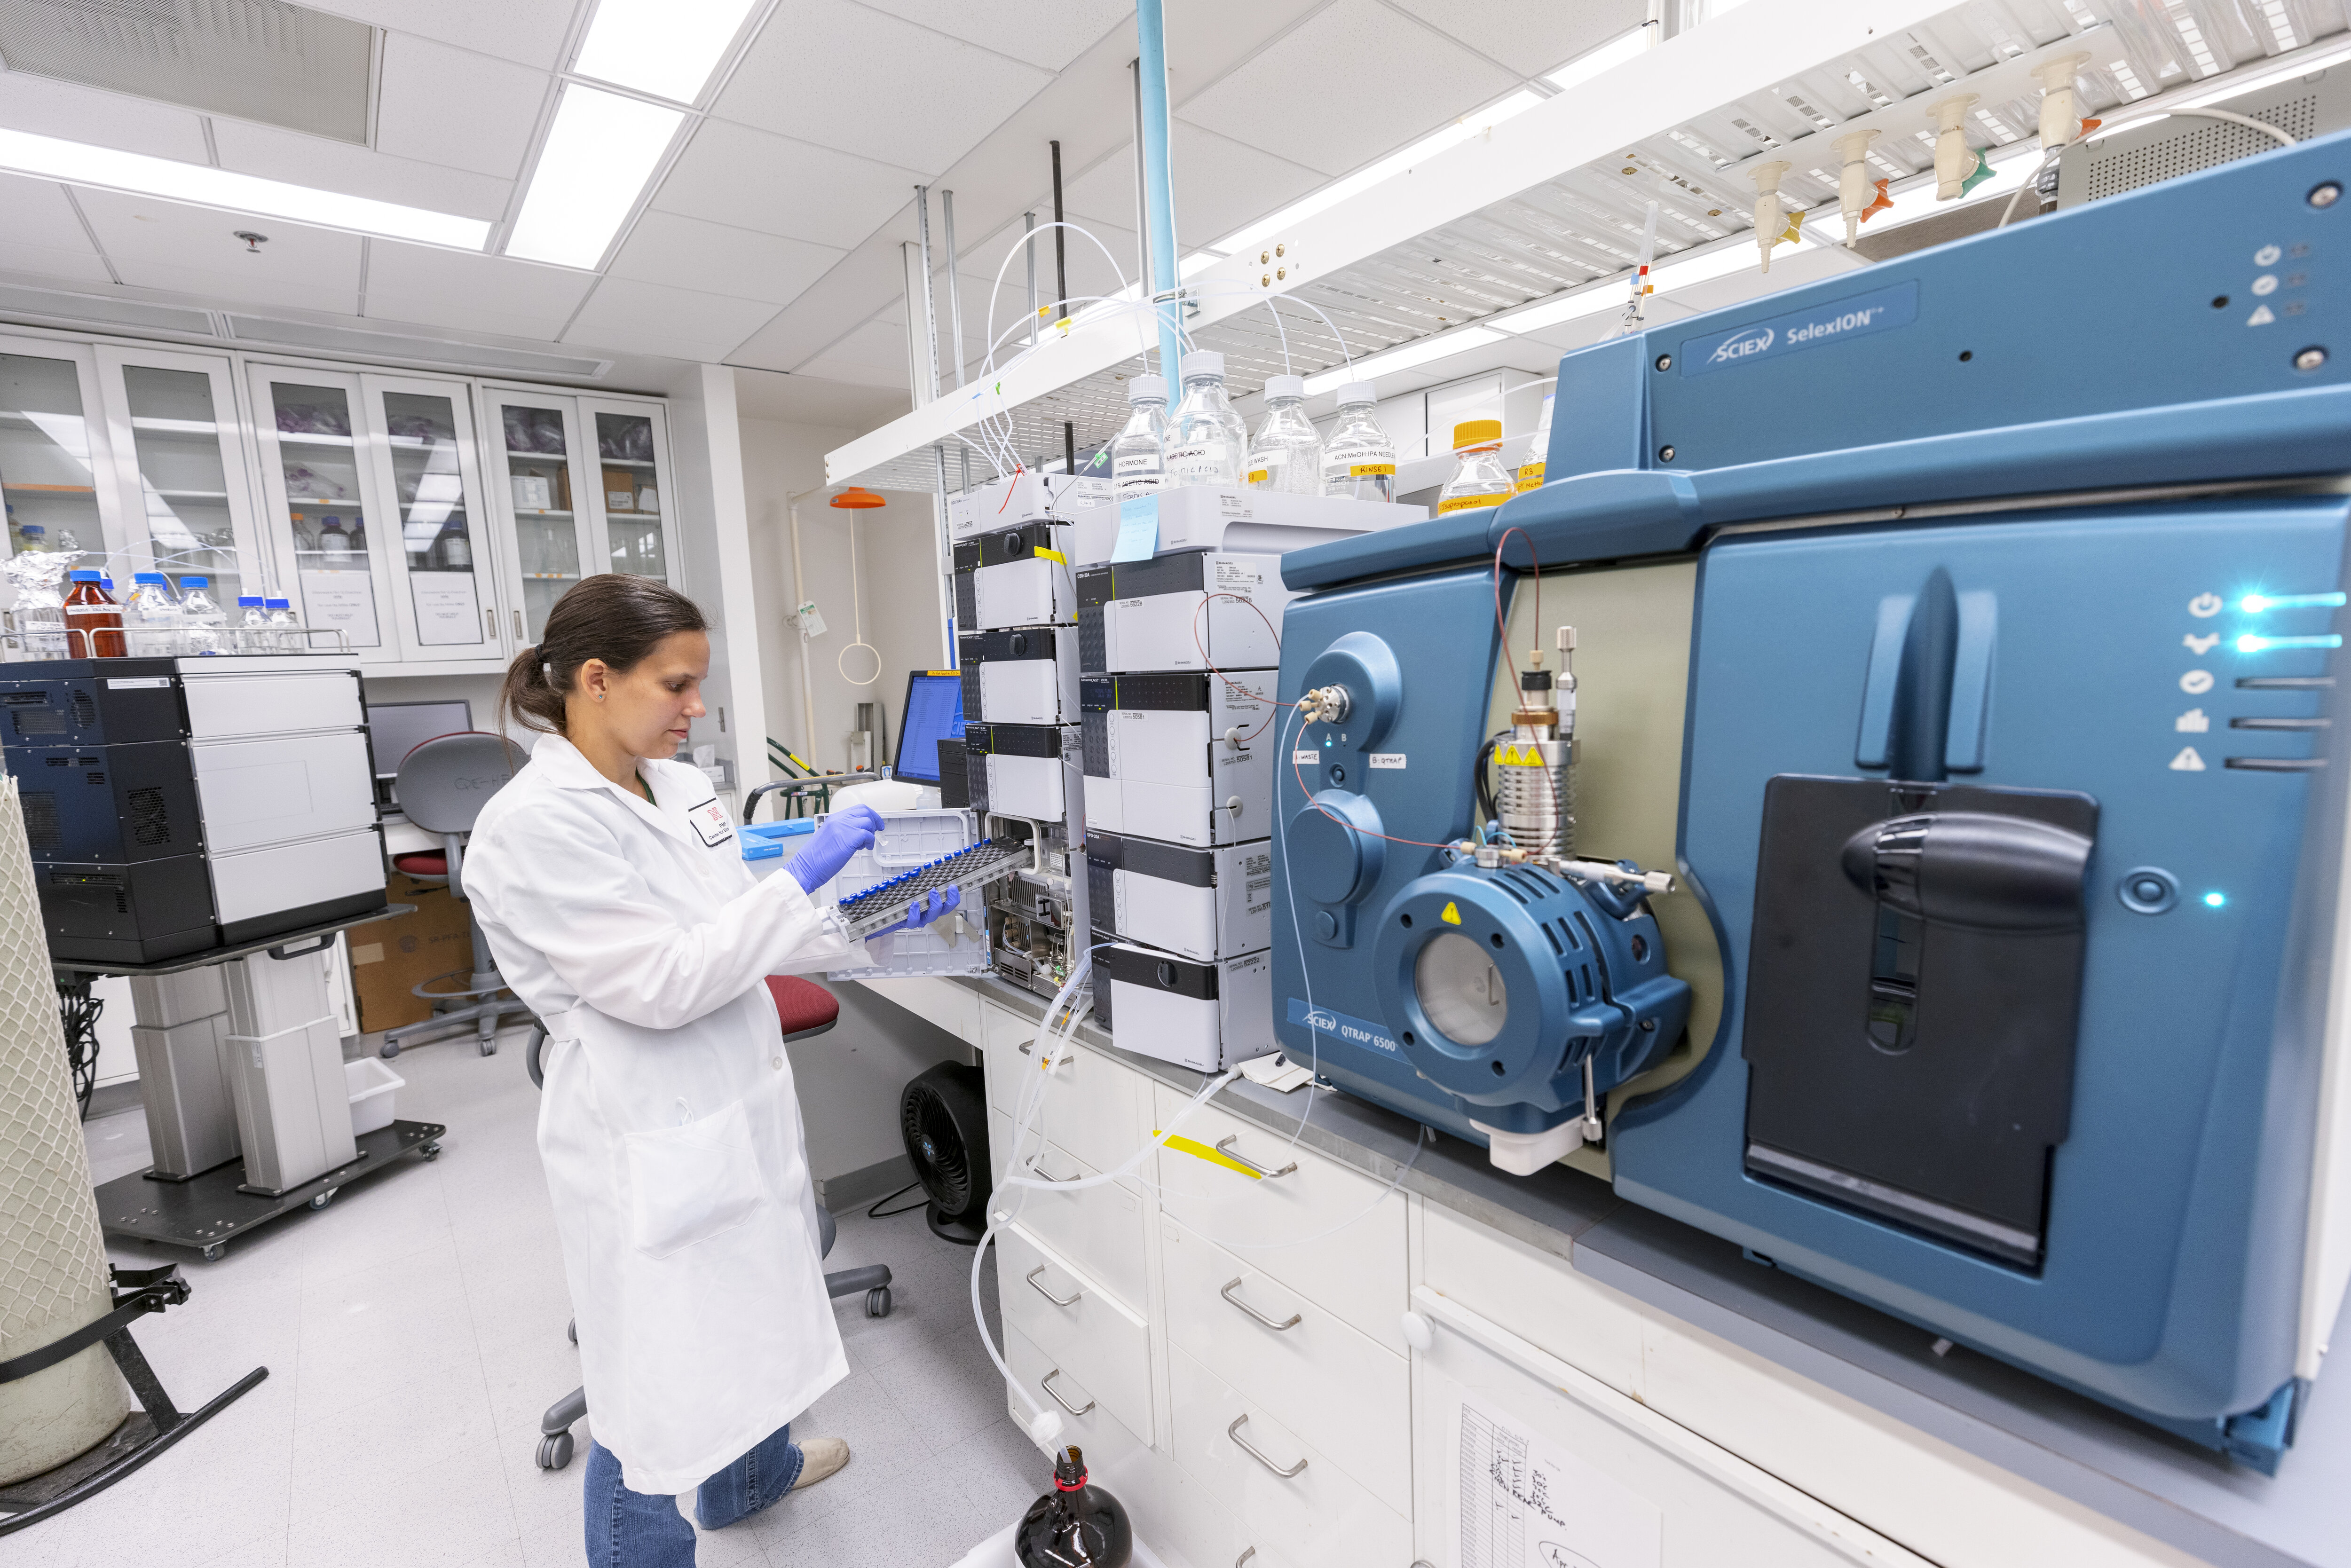 Researcher with the Sciex QTRAP 6500+ mass spectrometer with SelexION+ ion mobility coupled to Shimadzu Nexera II UHPLC